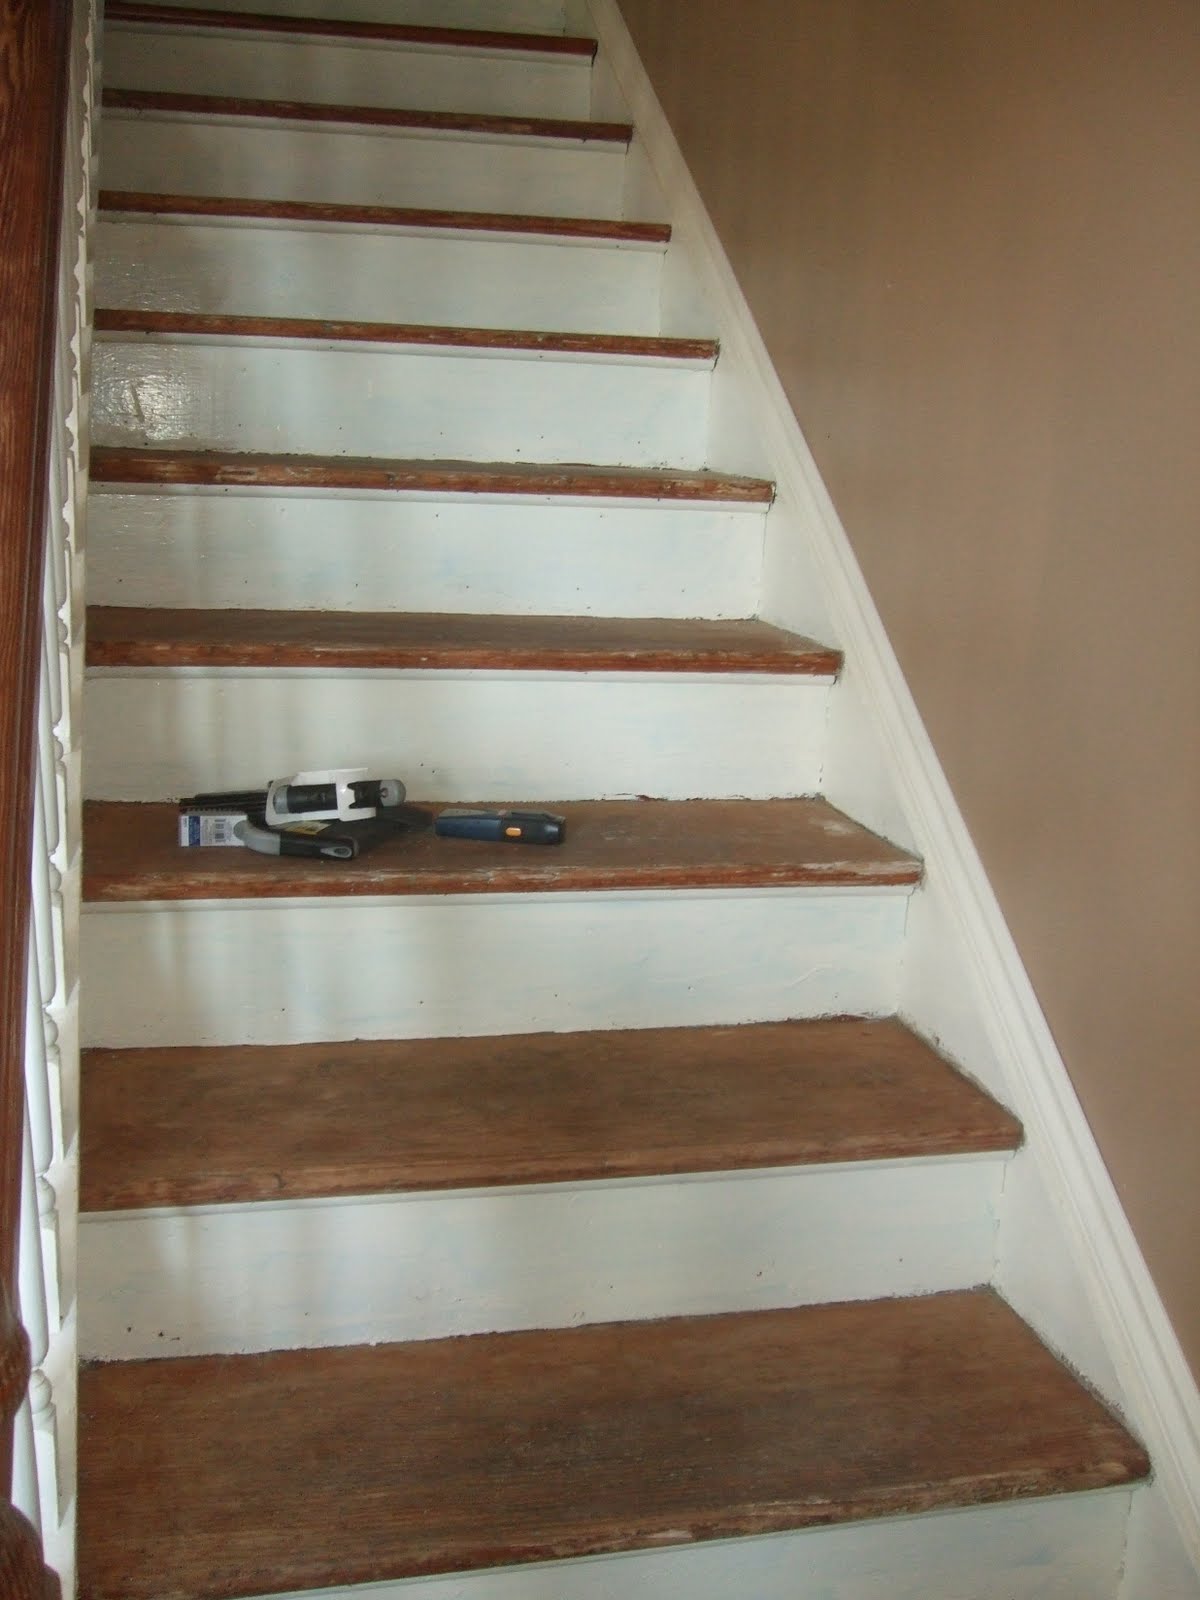 The Smiths: Stairs - painting, adding baseboard, more stripping